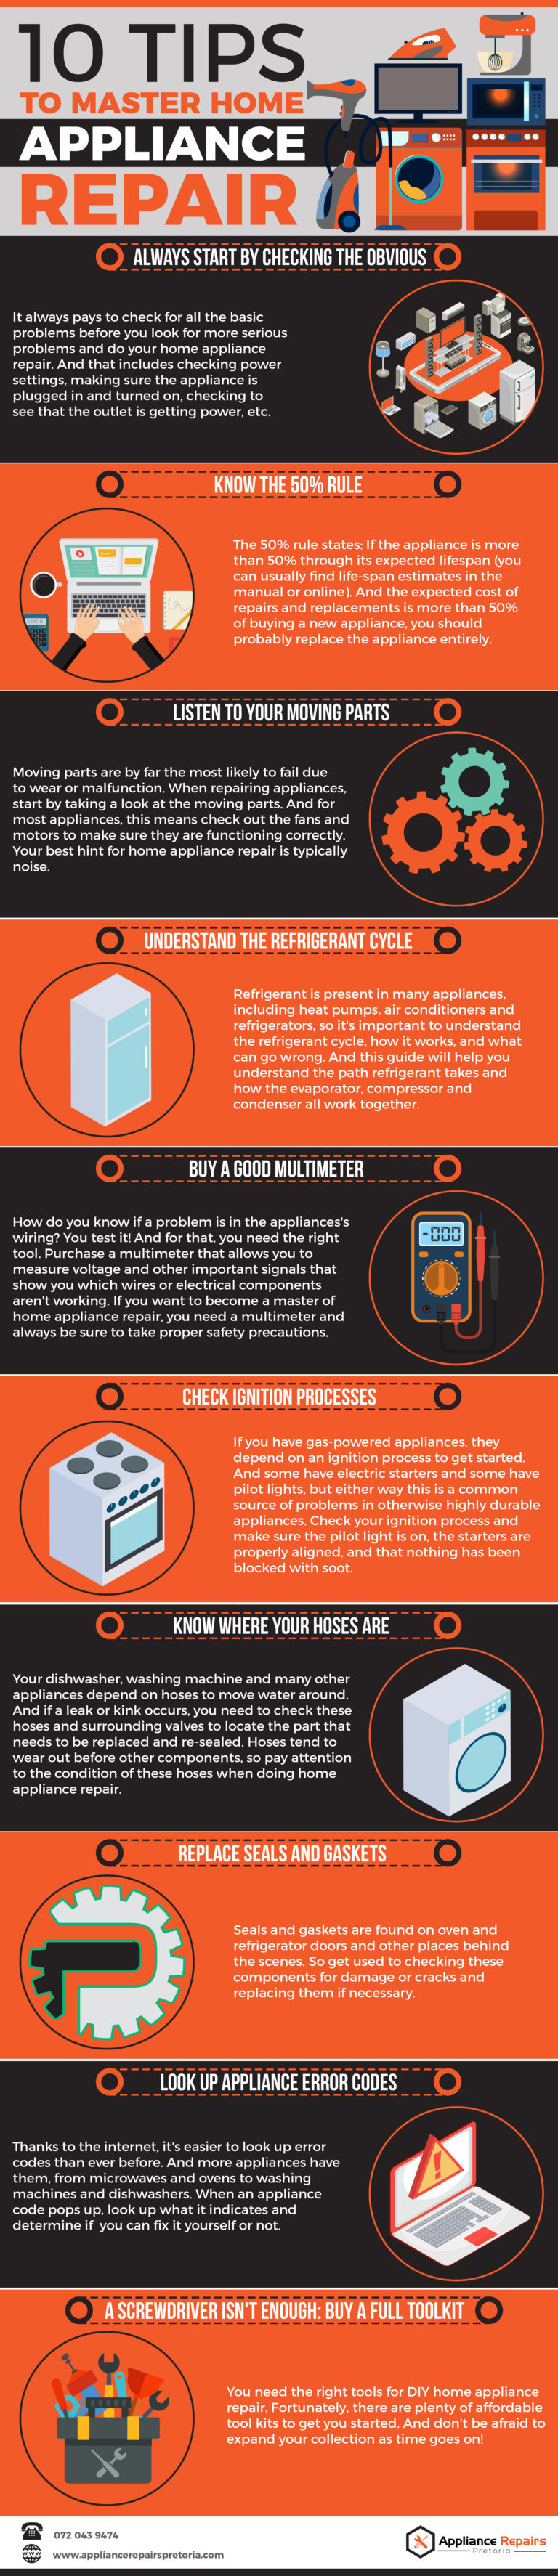 steps-to-take-for-effective-home-appliance-repairs-infographic